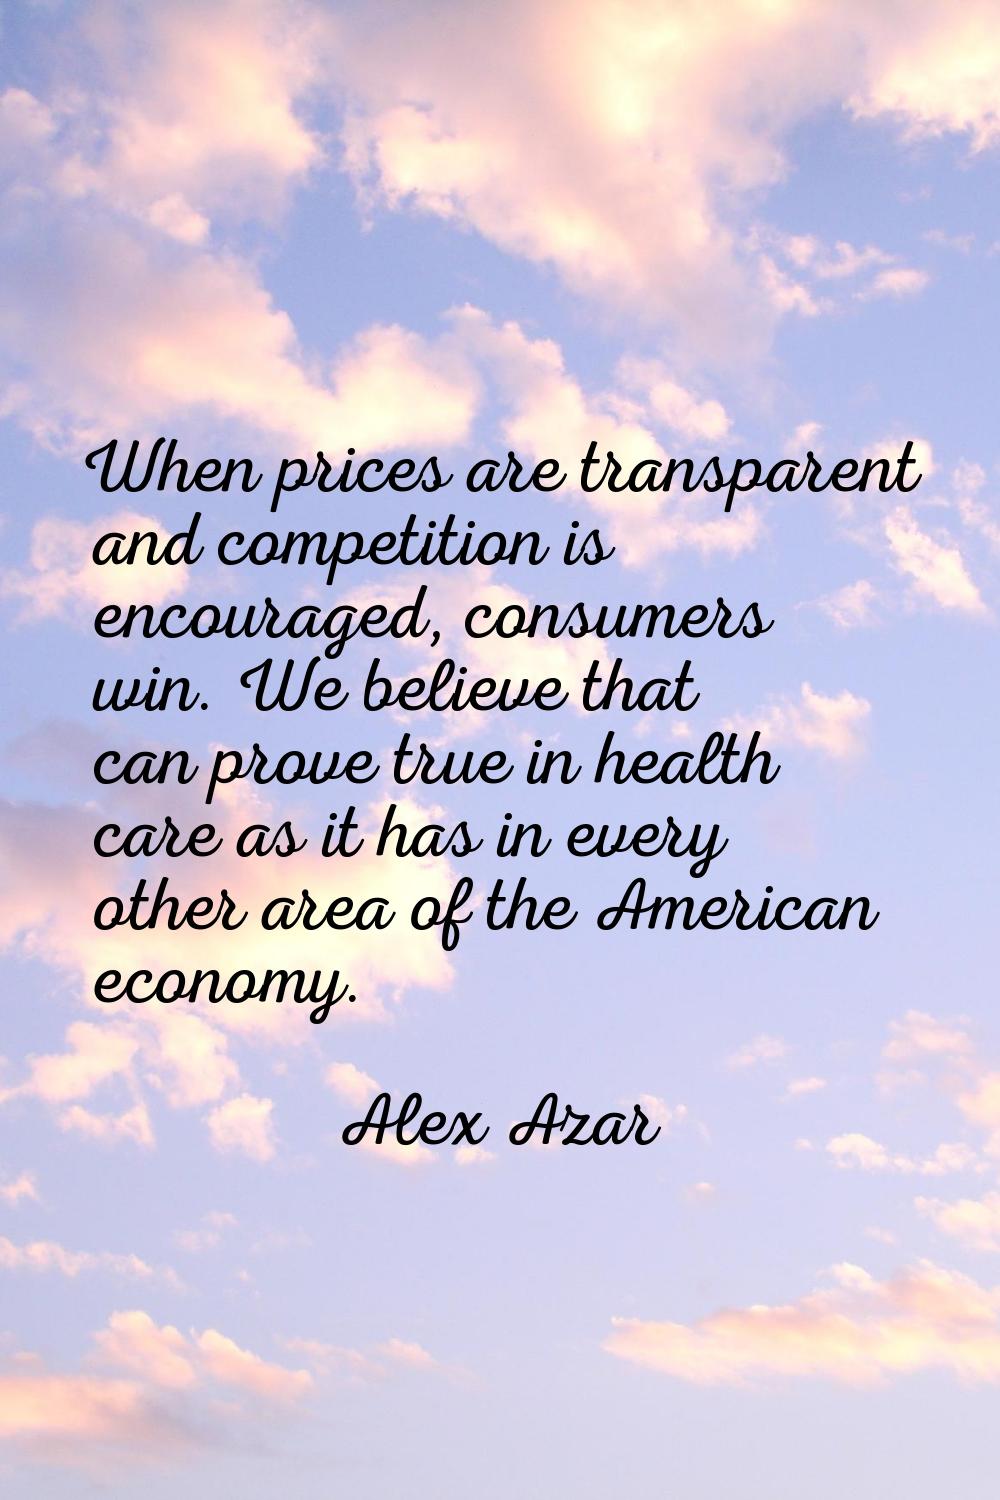 When prices are transparent and competition is encouraged, consumers win. We believe that can prove